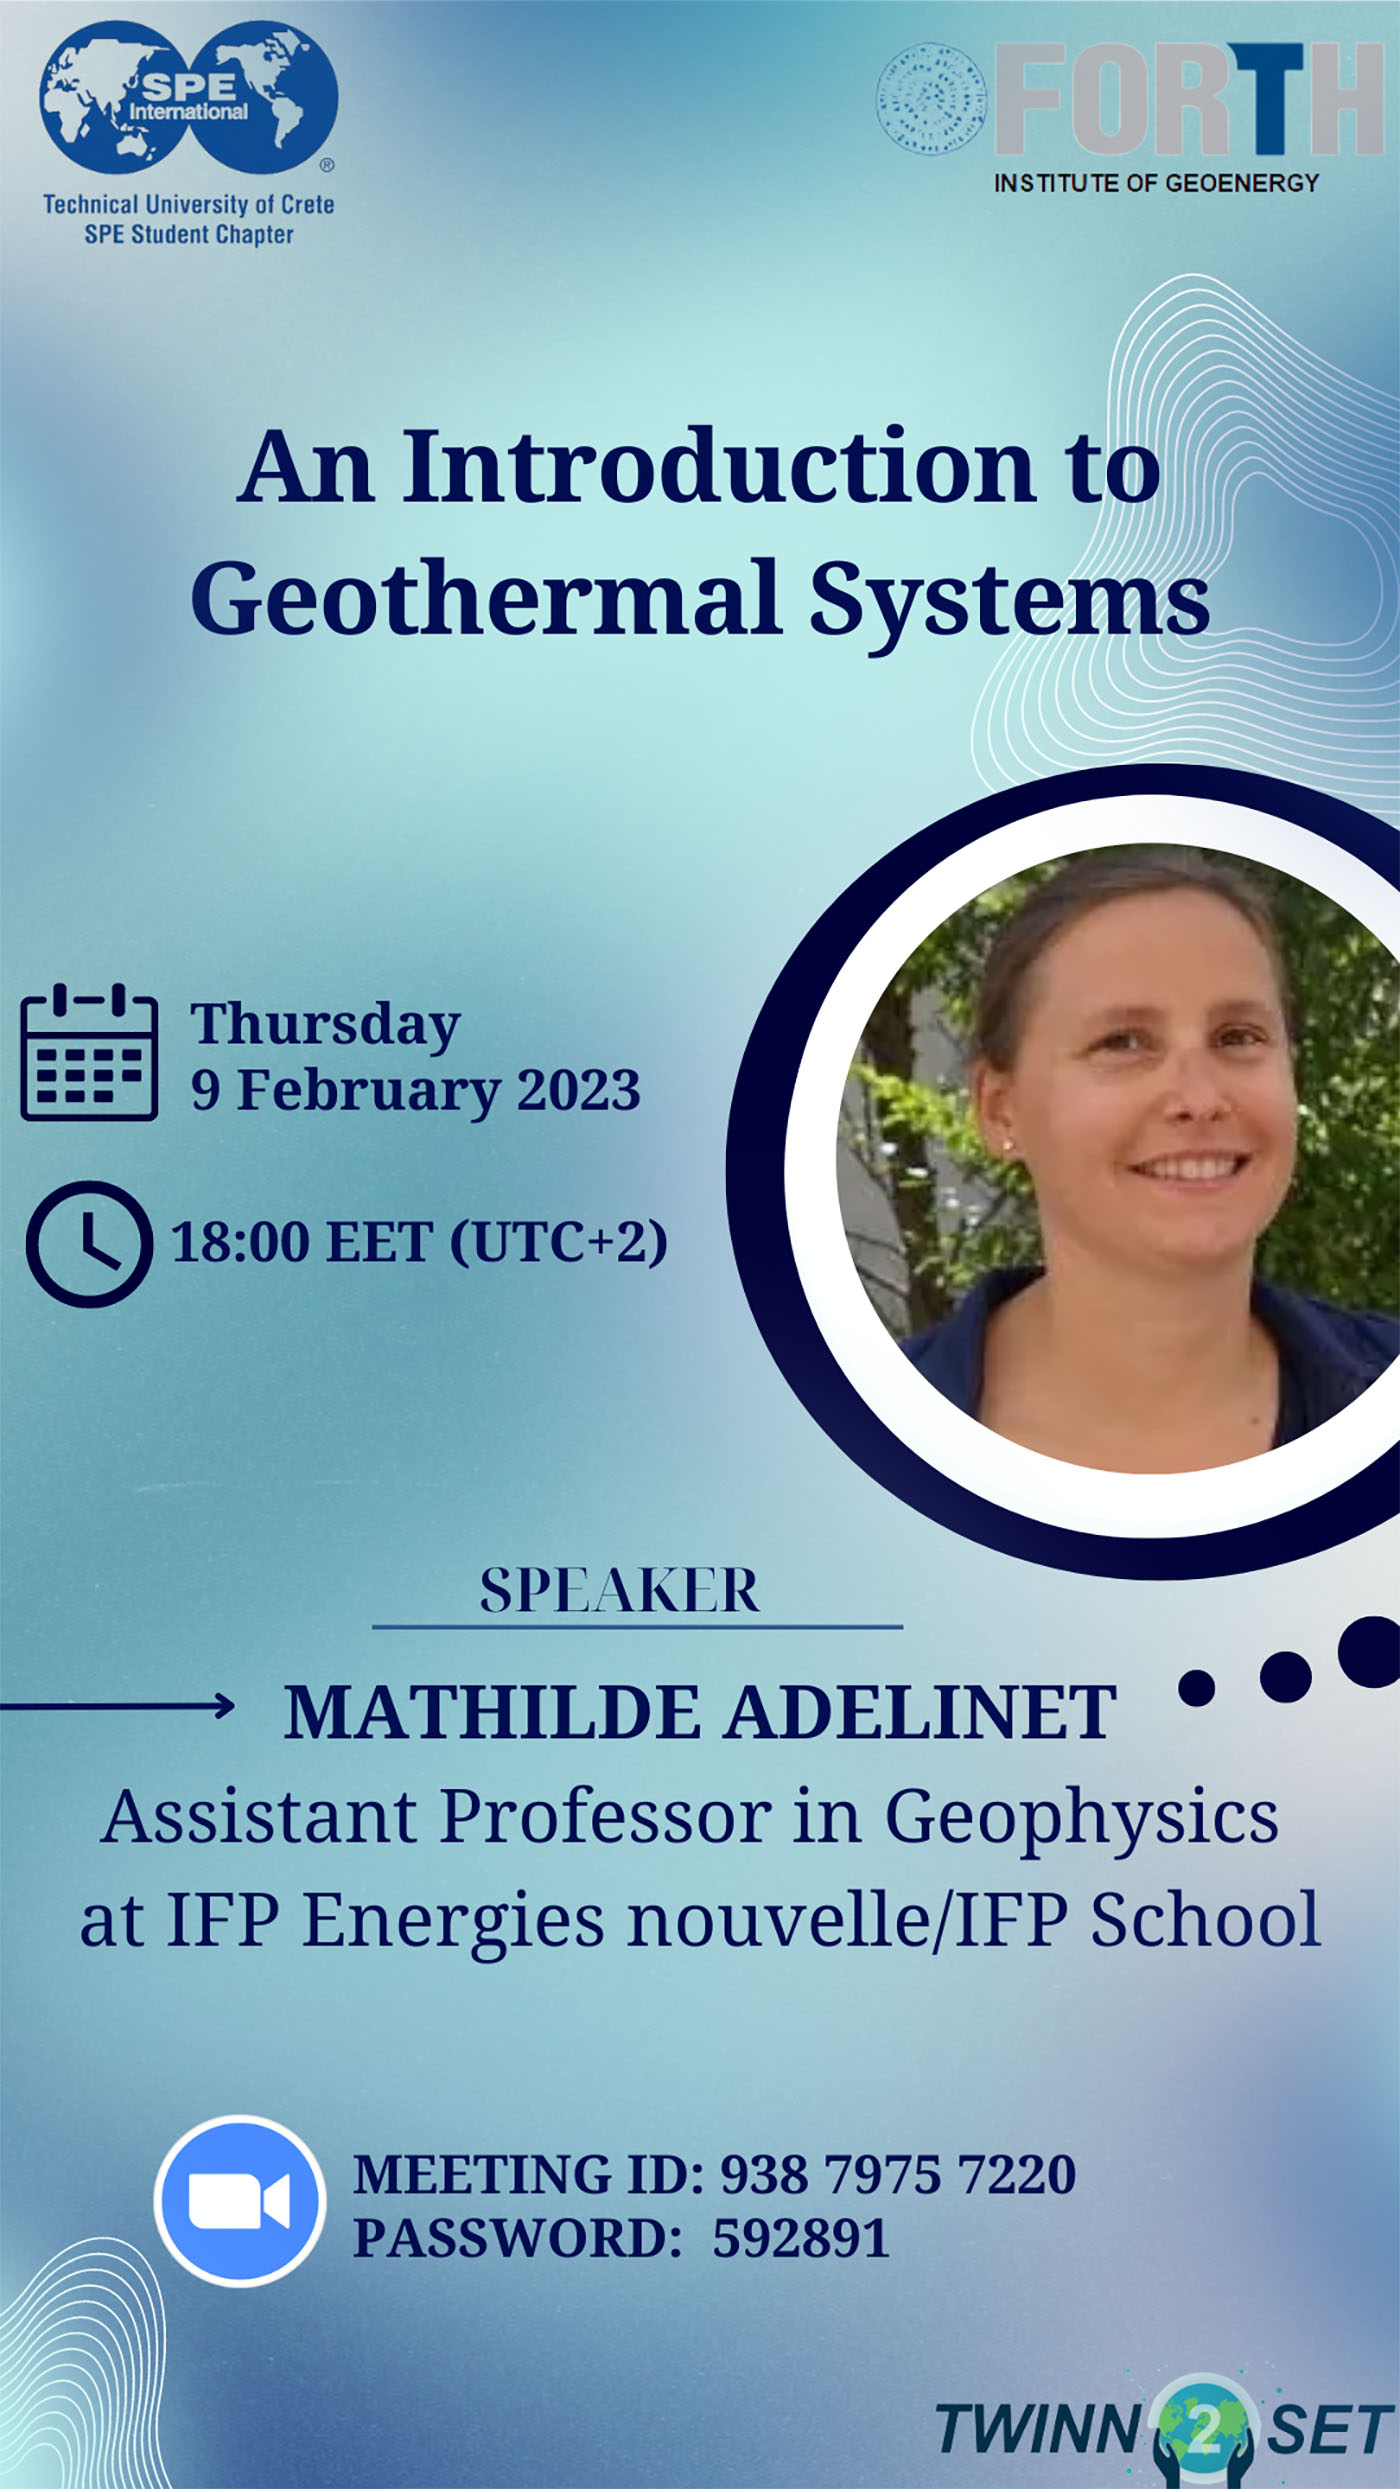 An Introduction to Geothermal Systems. Speaker: MATHILDE ADELINET